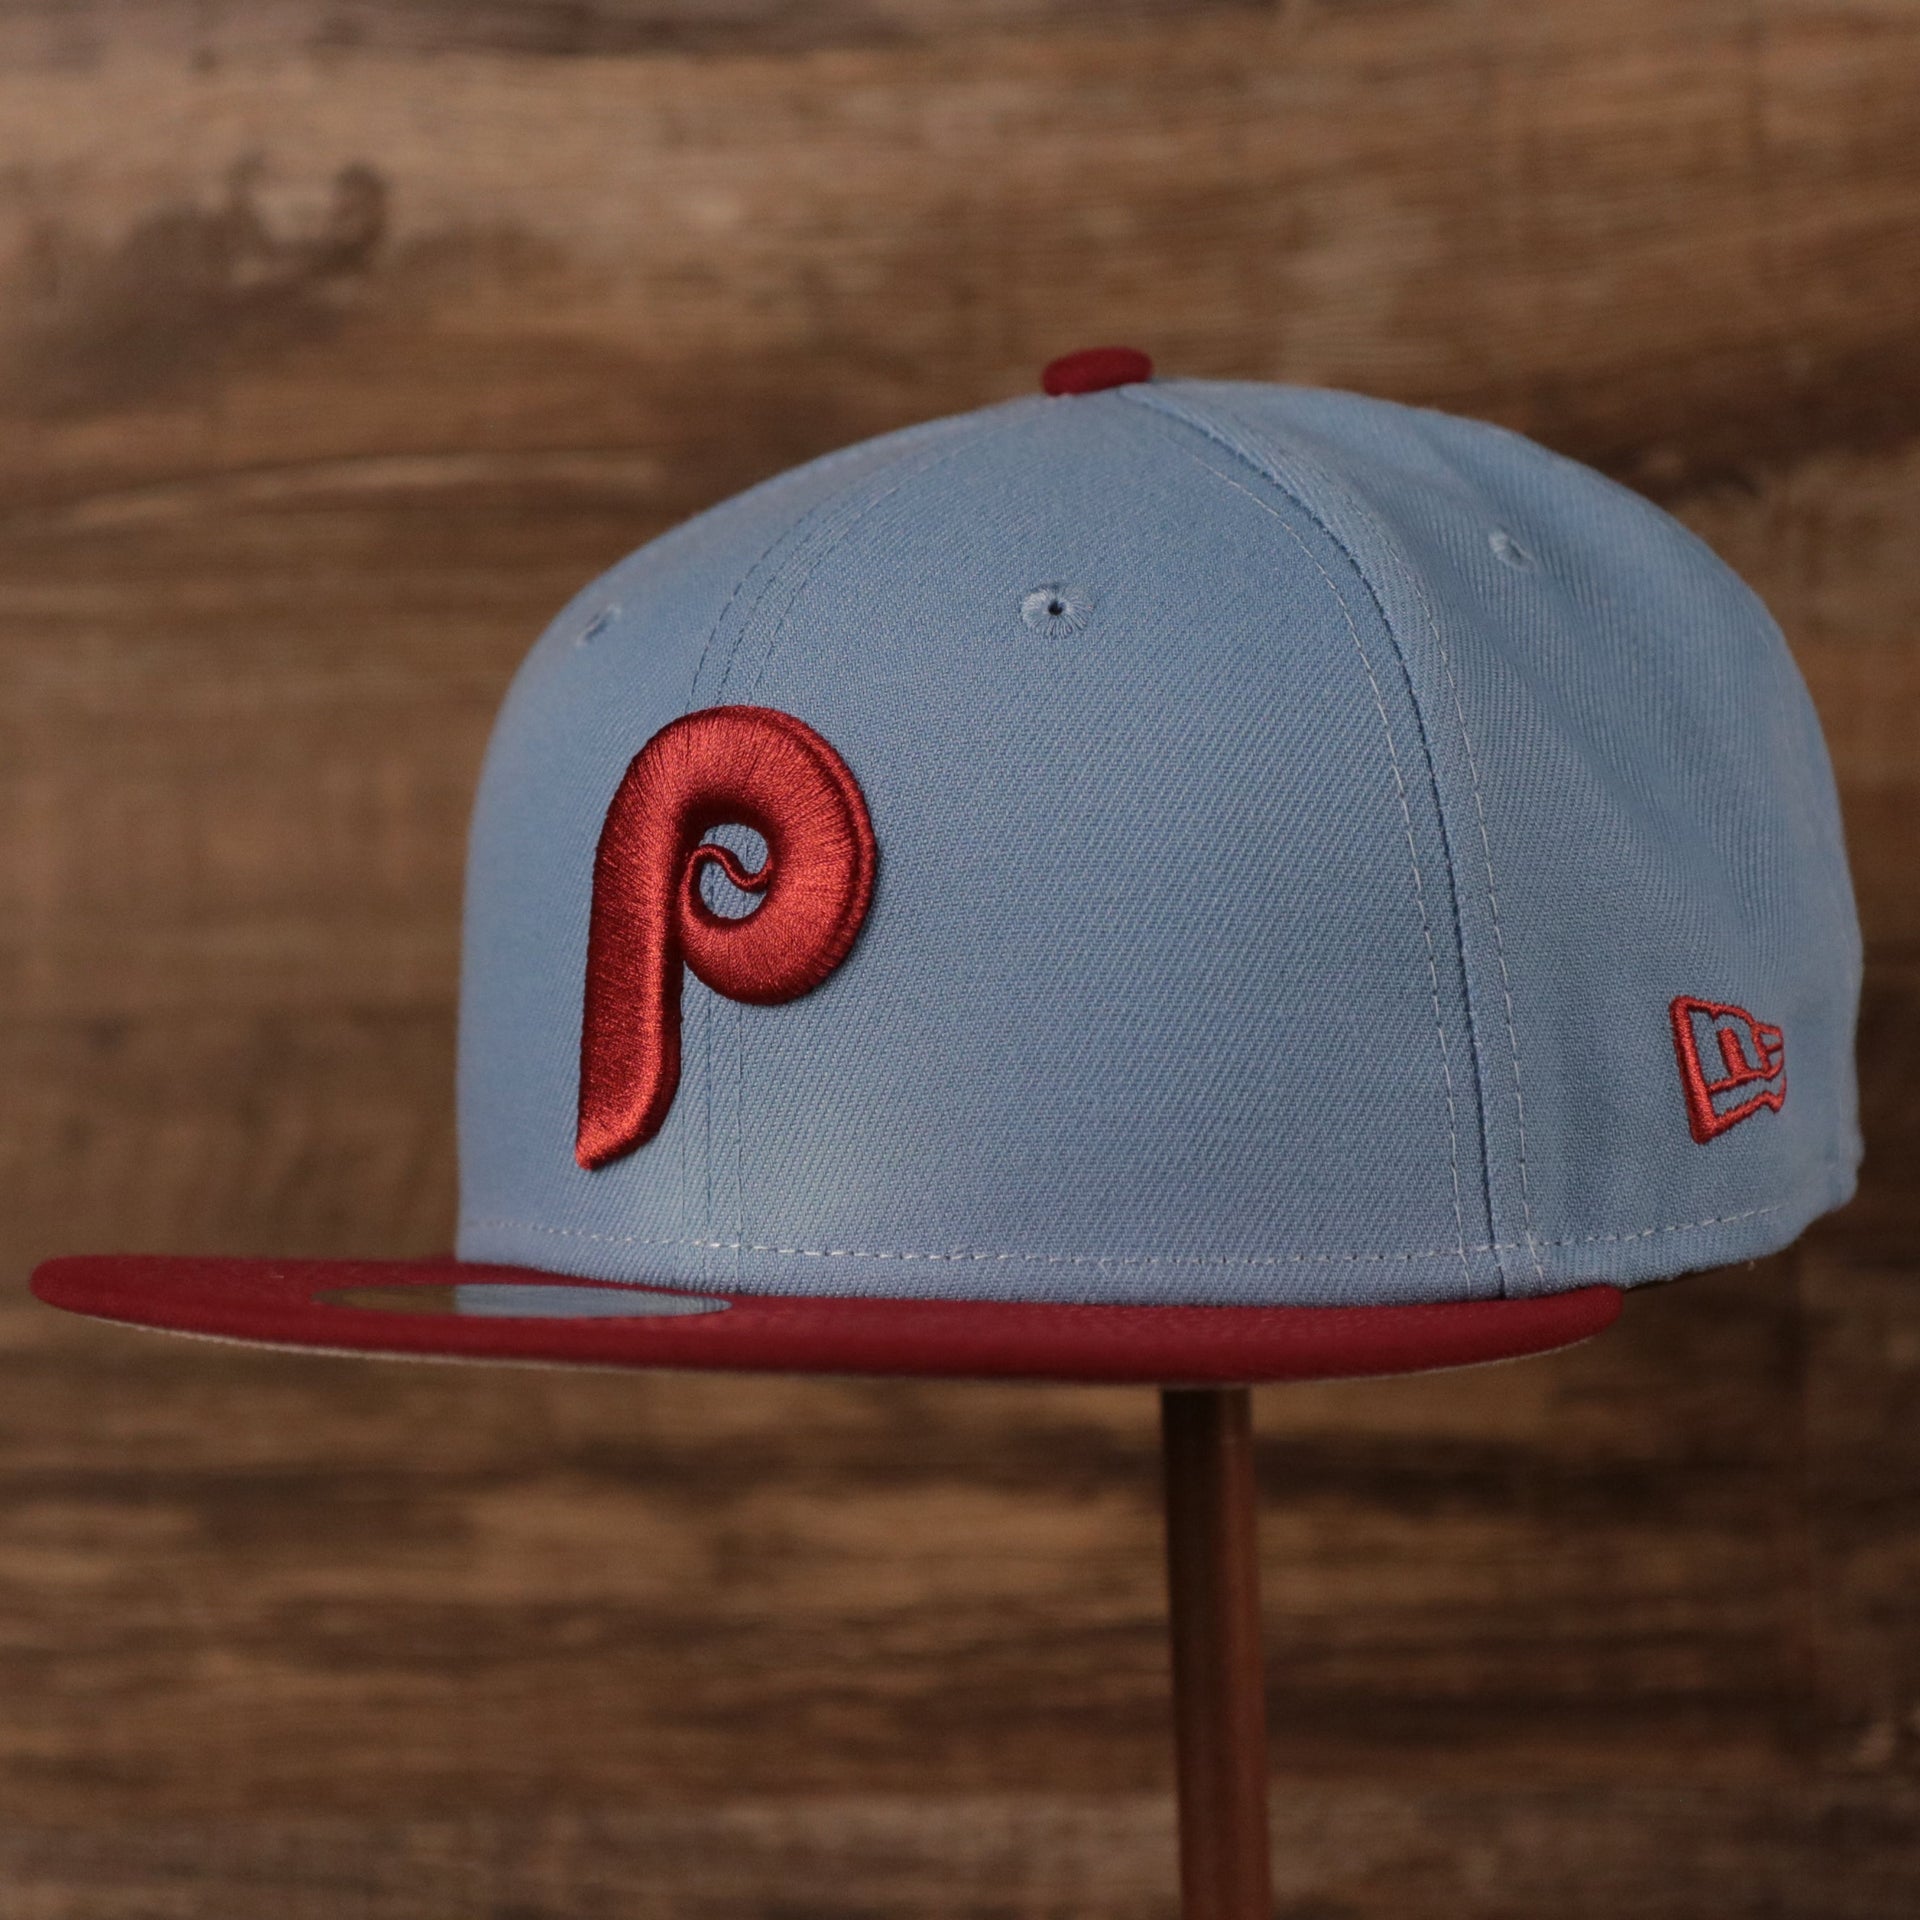 The World Series 1980 throwback Philadelphia Phillies side patch New Era fitted cap with gray bottom brim.